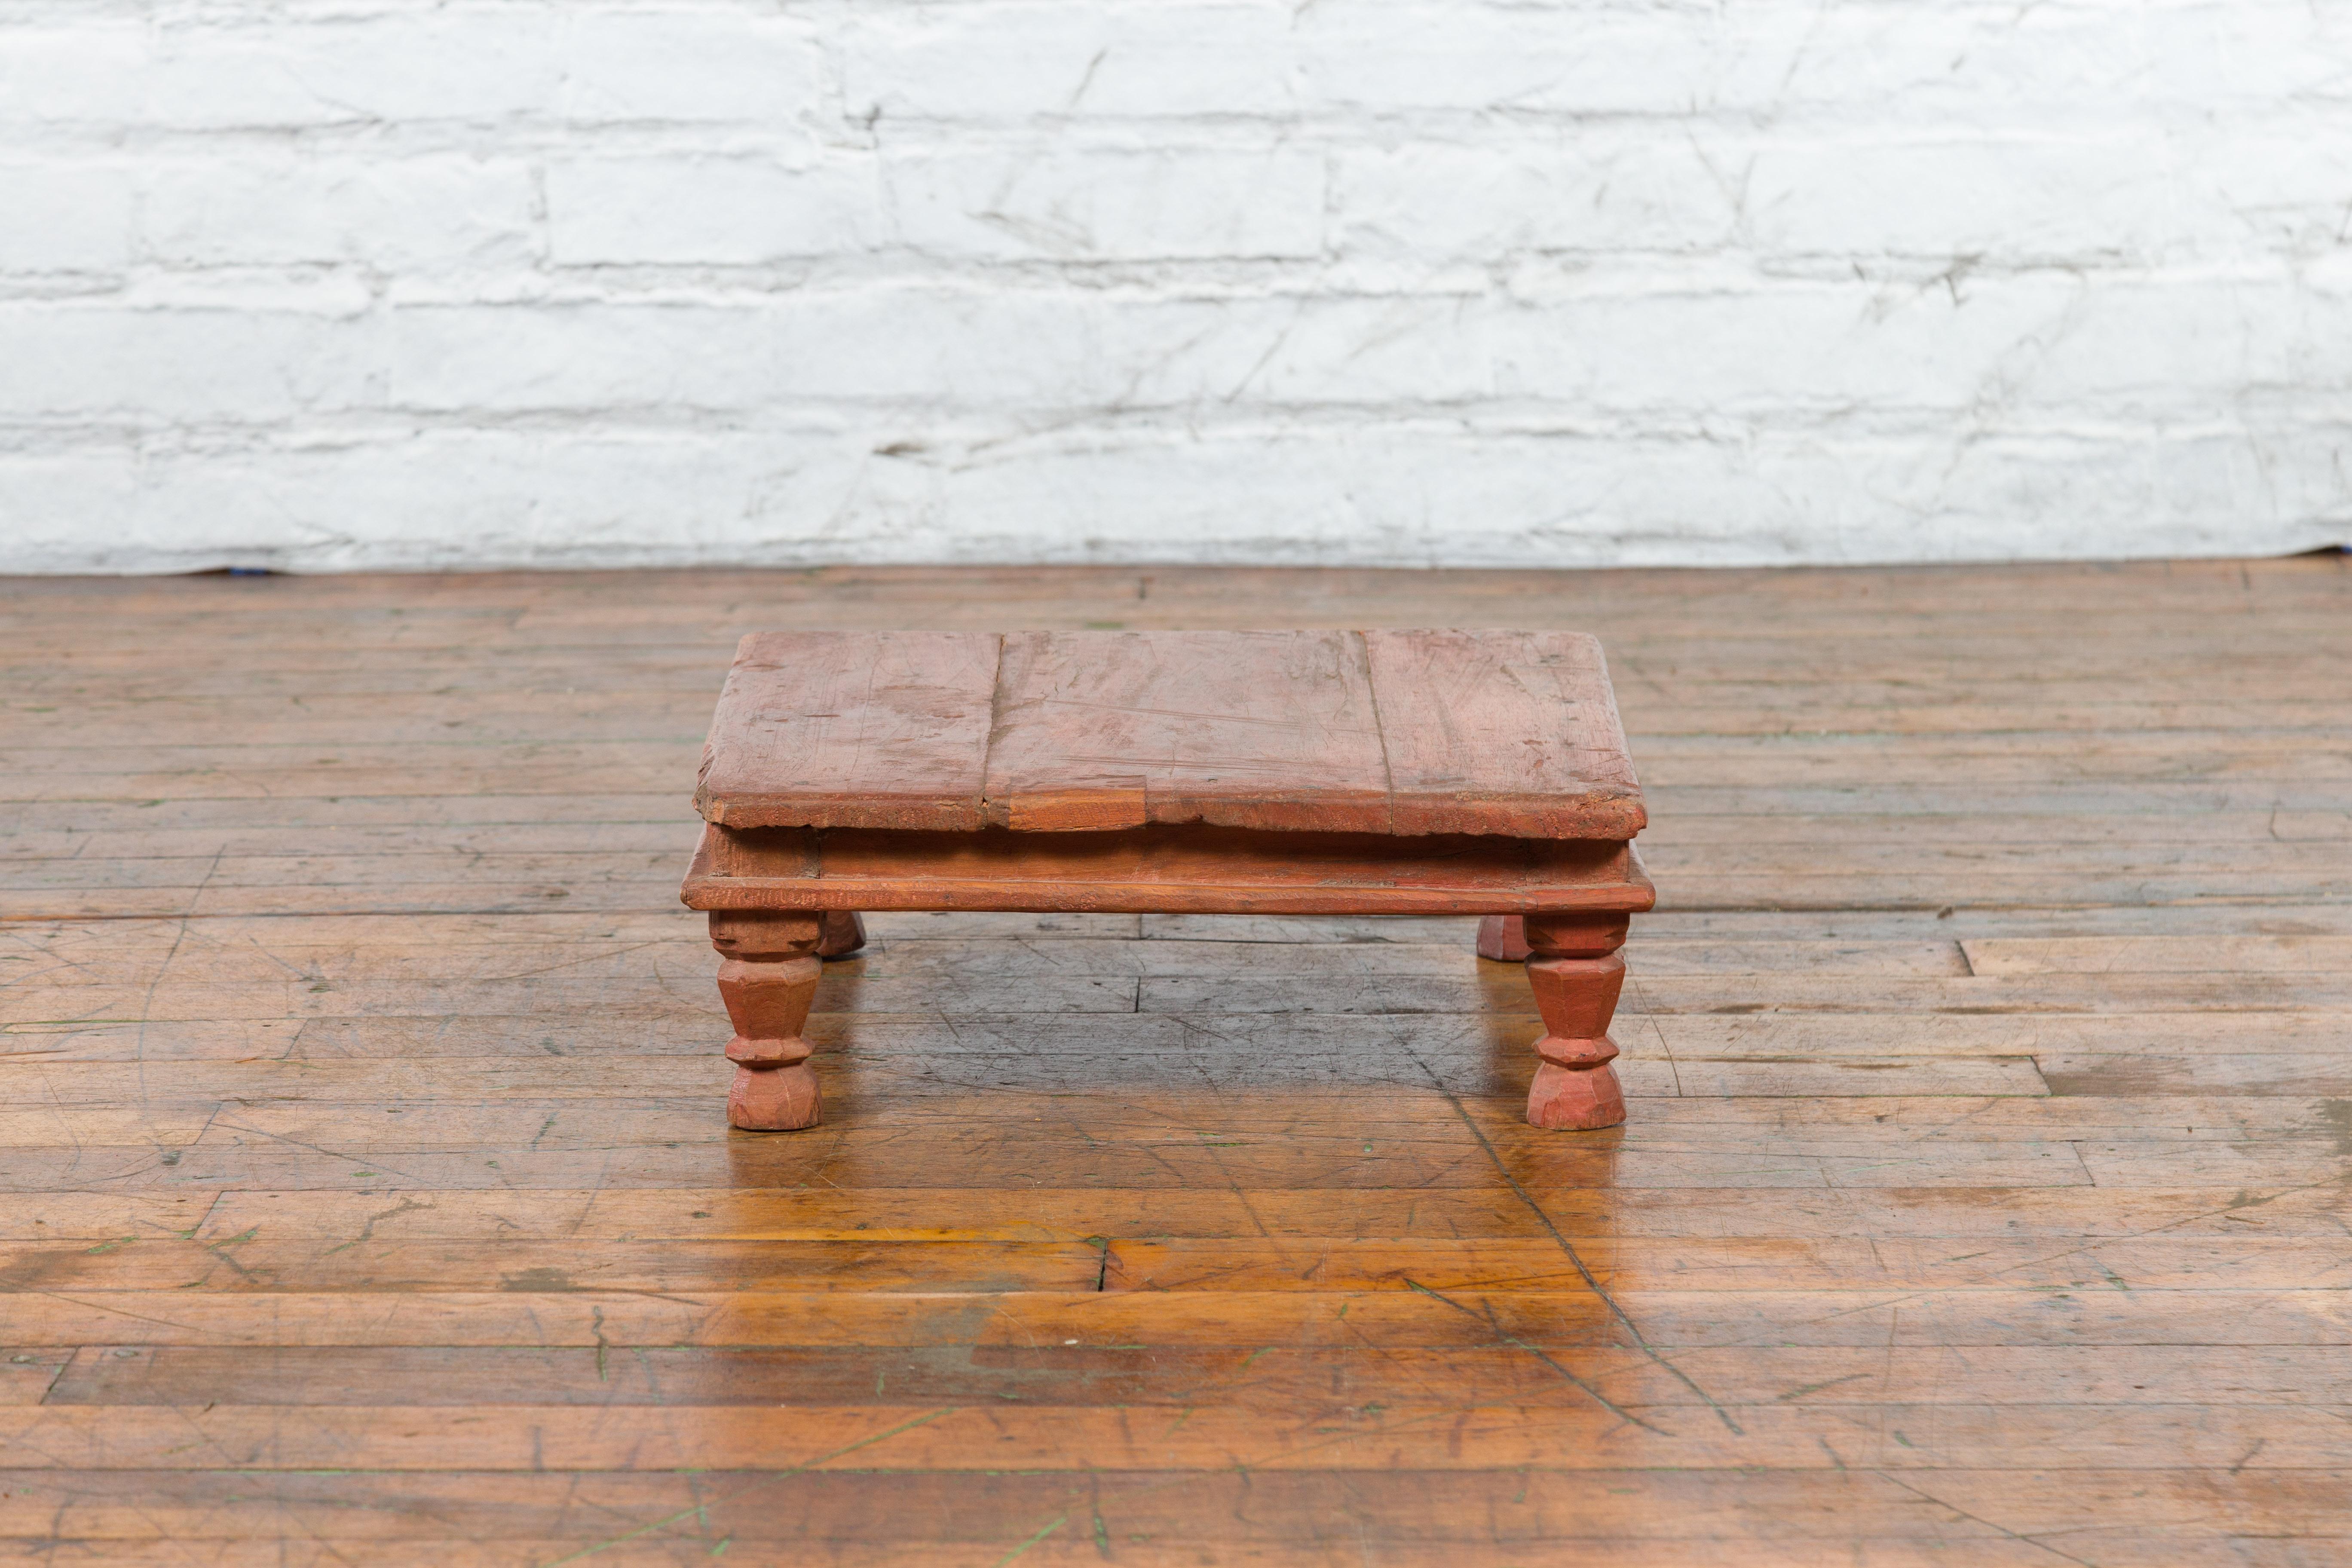 Antique Indian Low Wooden Prayer Table Stand with Carved Angular Legs In Good Condition For Sale In Yonkers, NY